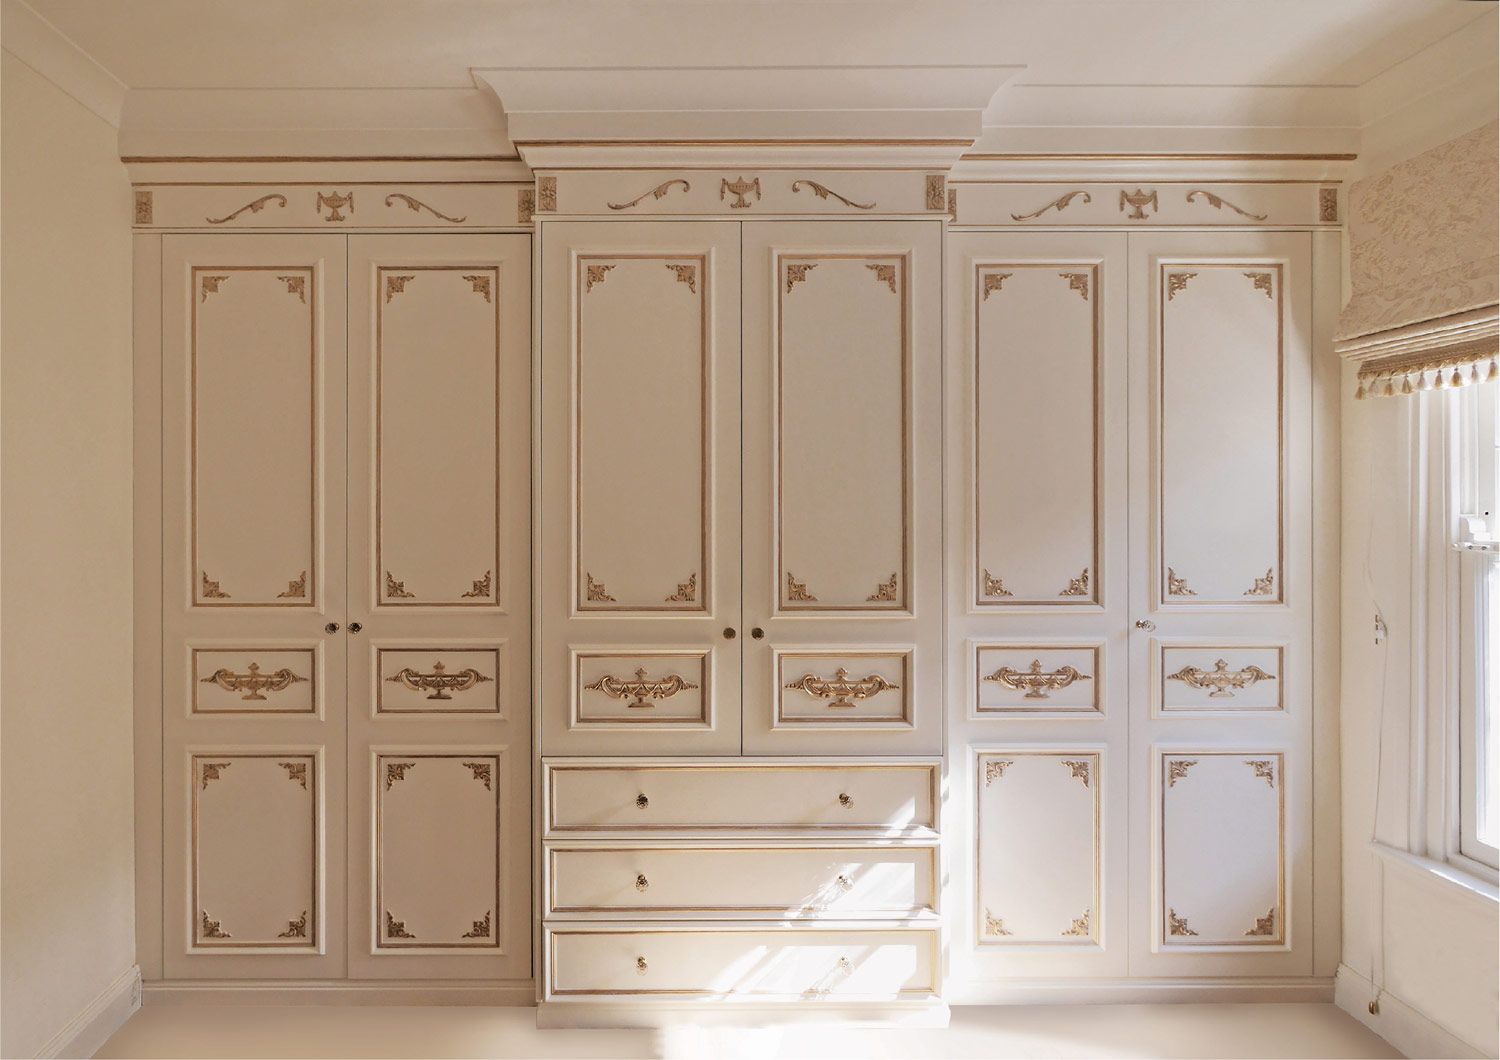 Breathtaking French Wardrobe Designs | Custom Made | Luxury Finishes Within French Style White Wardrobes (View 14 of 15)